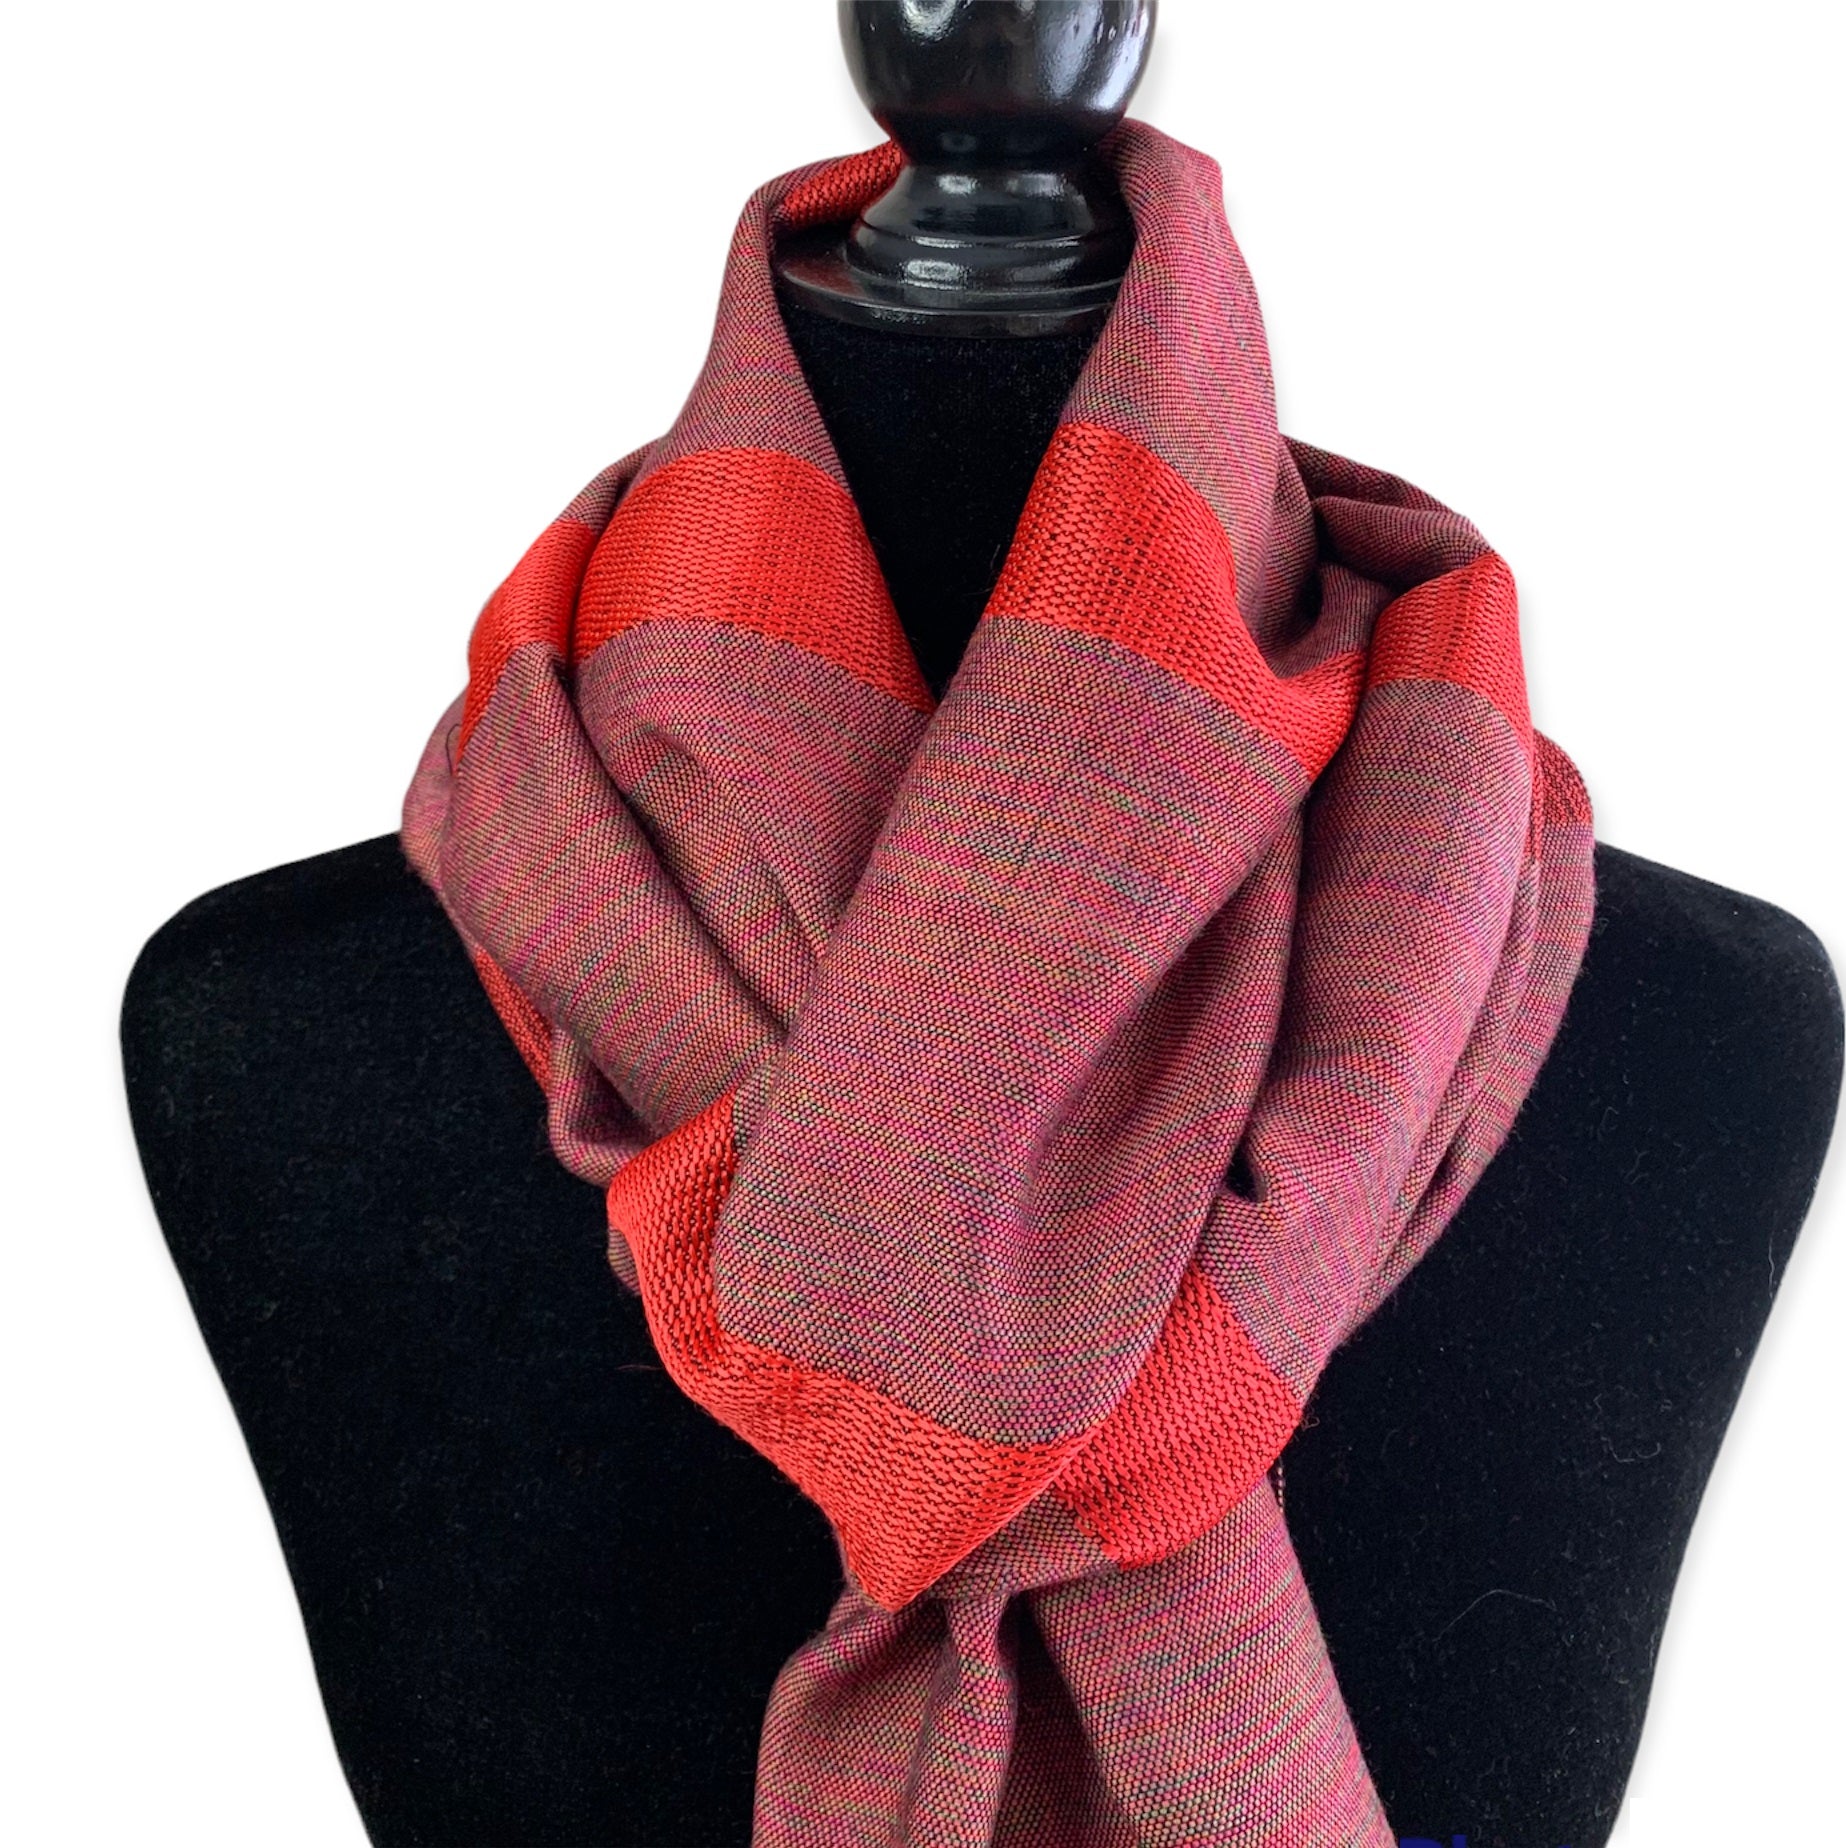 Helyat Handwoven Bamboo Viscose Scarf - Variegated Red & Green